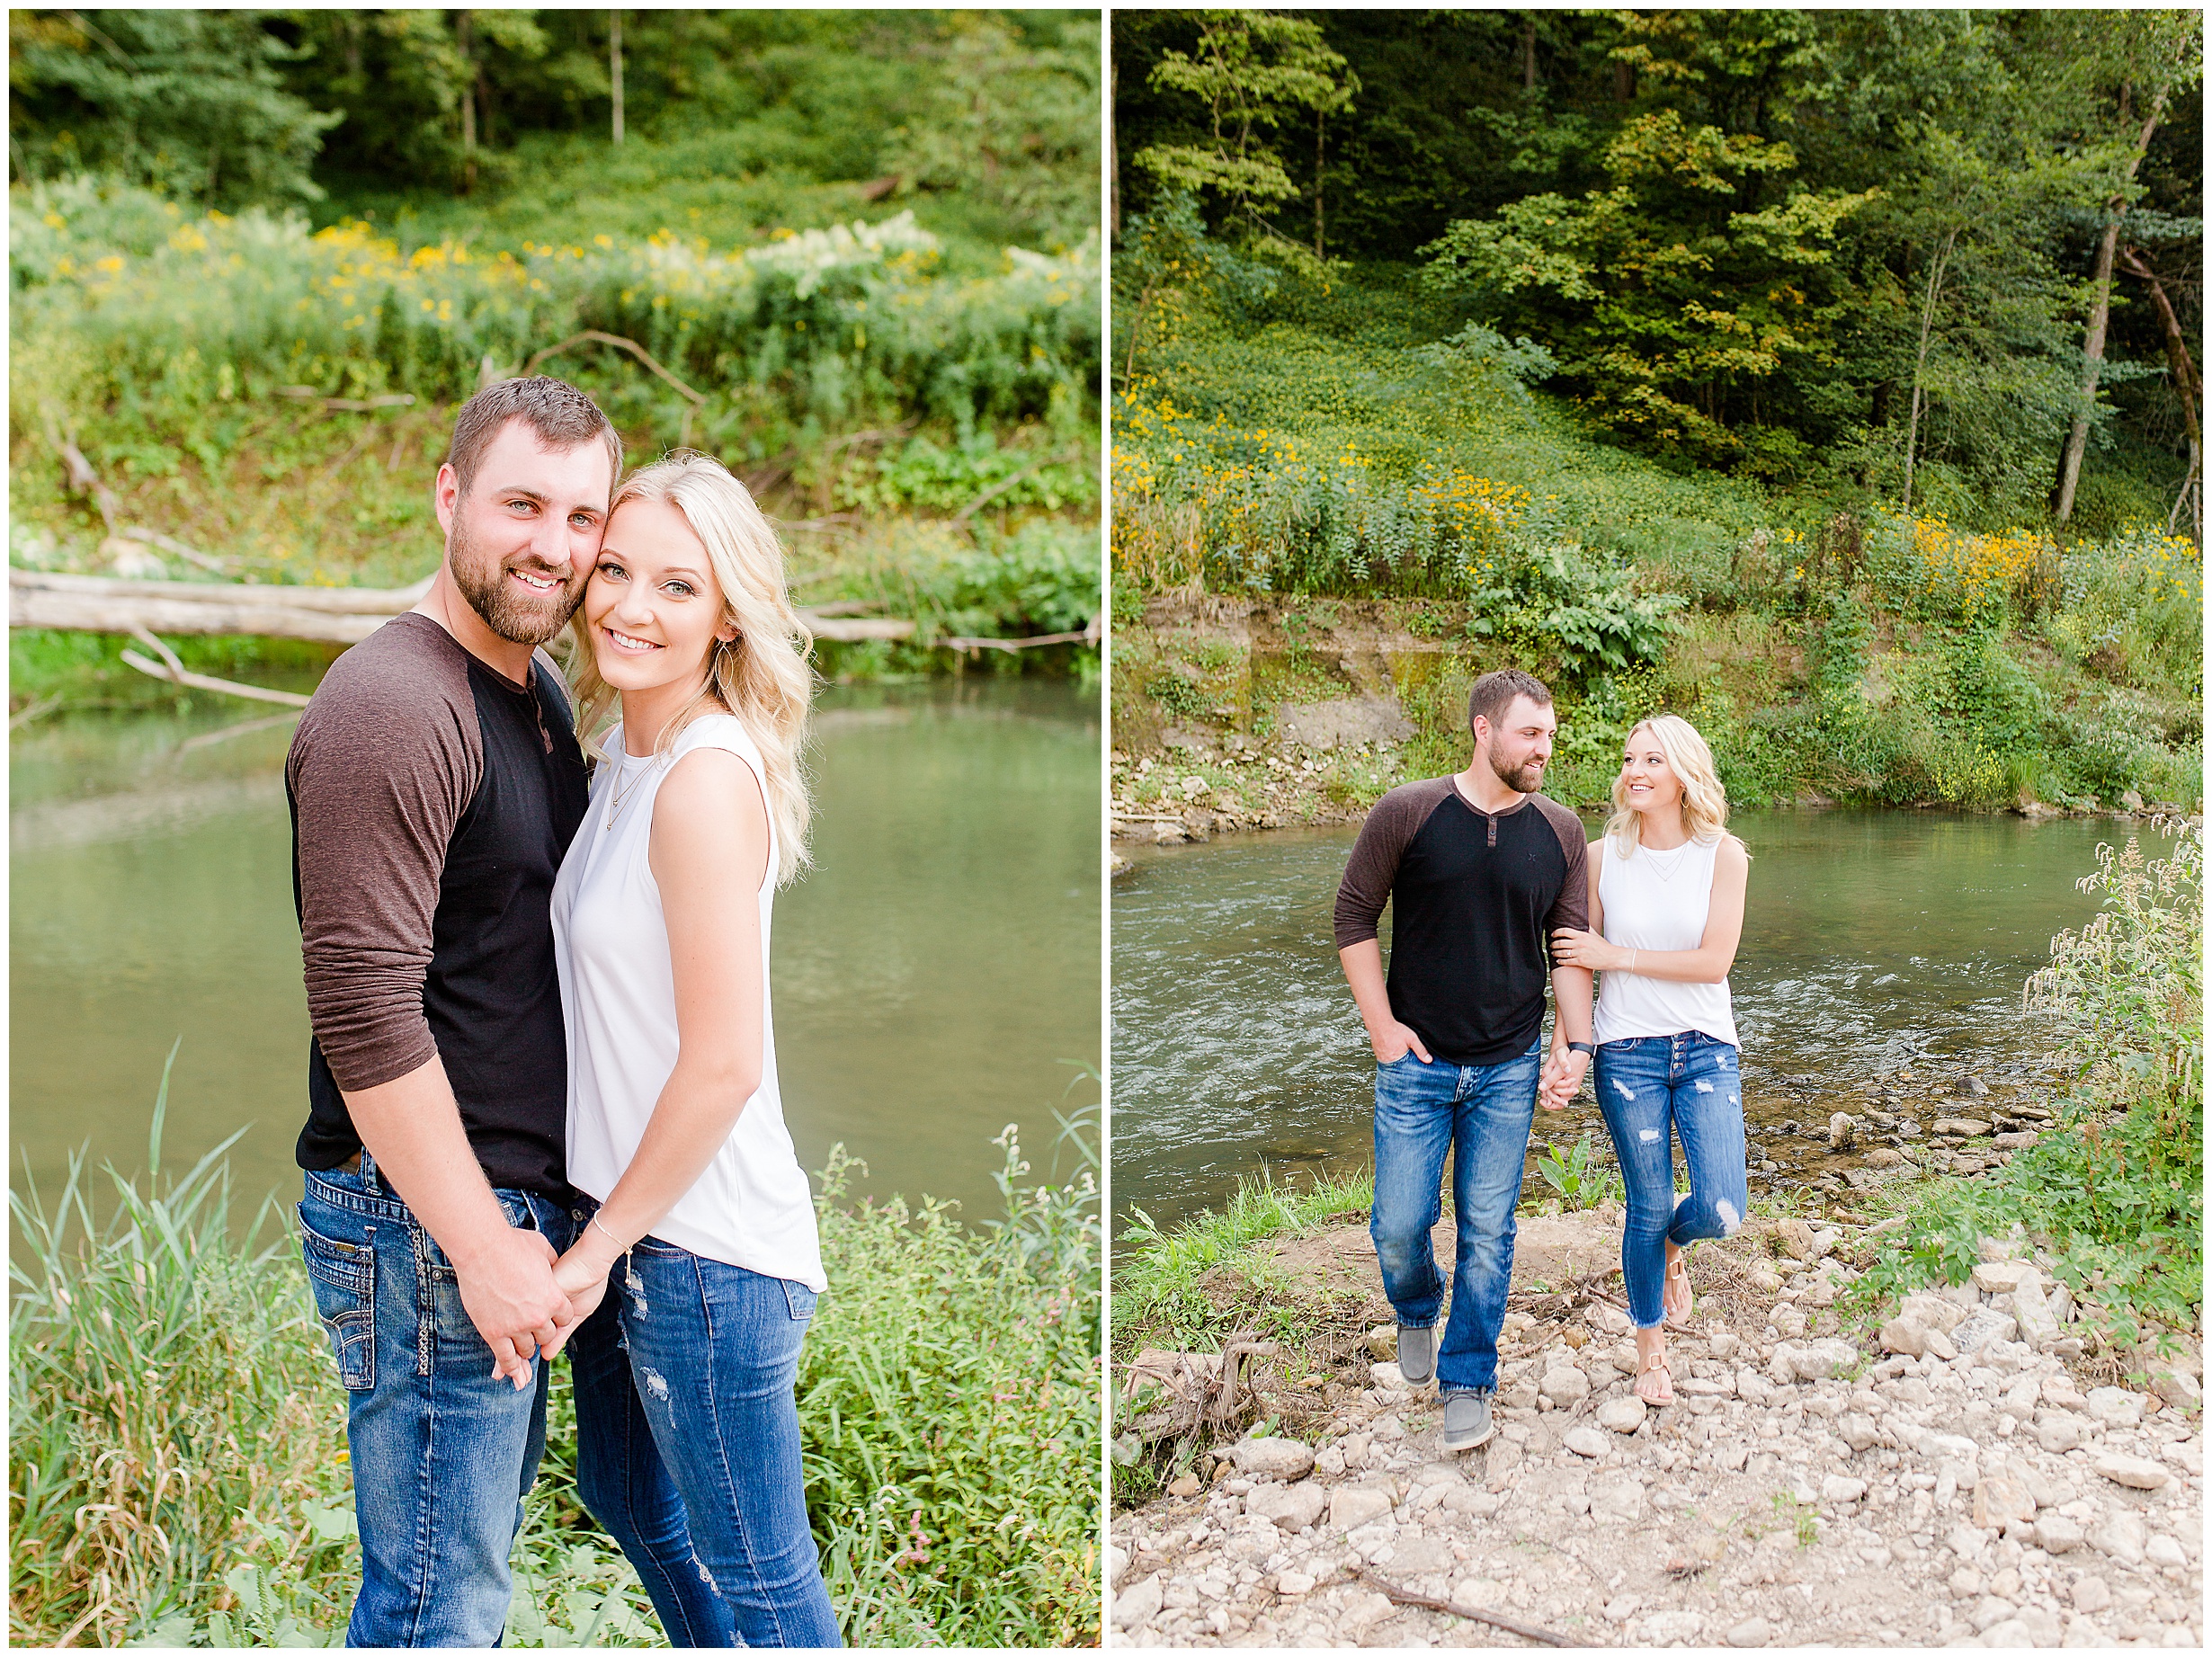 Yellow River Forest Engagement Session | Megan Snitker Photo-2.jpg